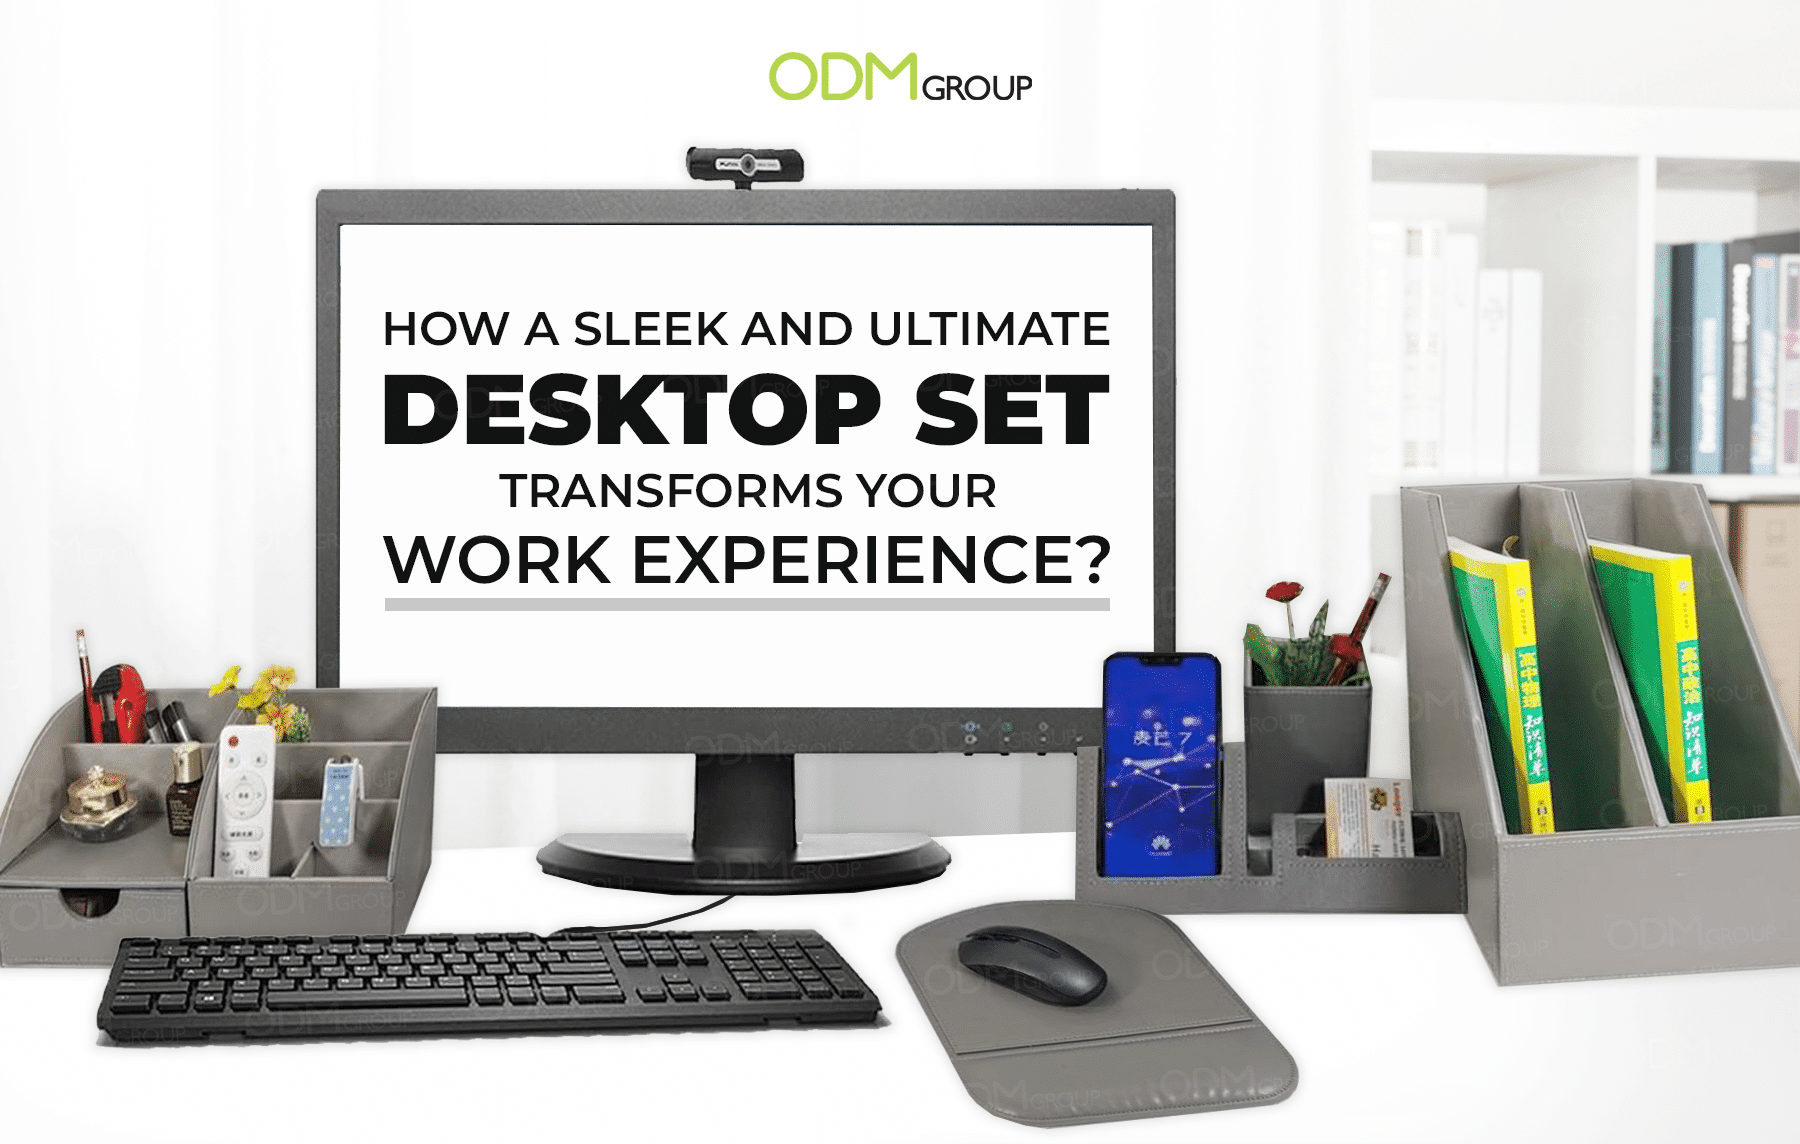 A sleek and organized desktop set including a monitor, keyboard, and various office accessories.